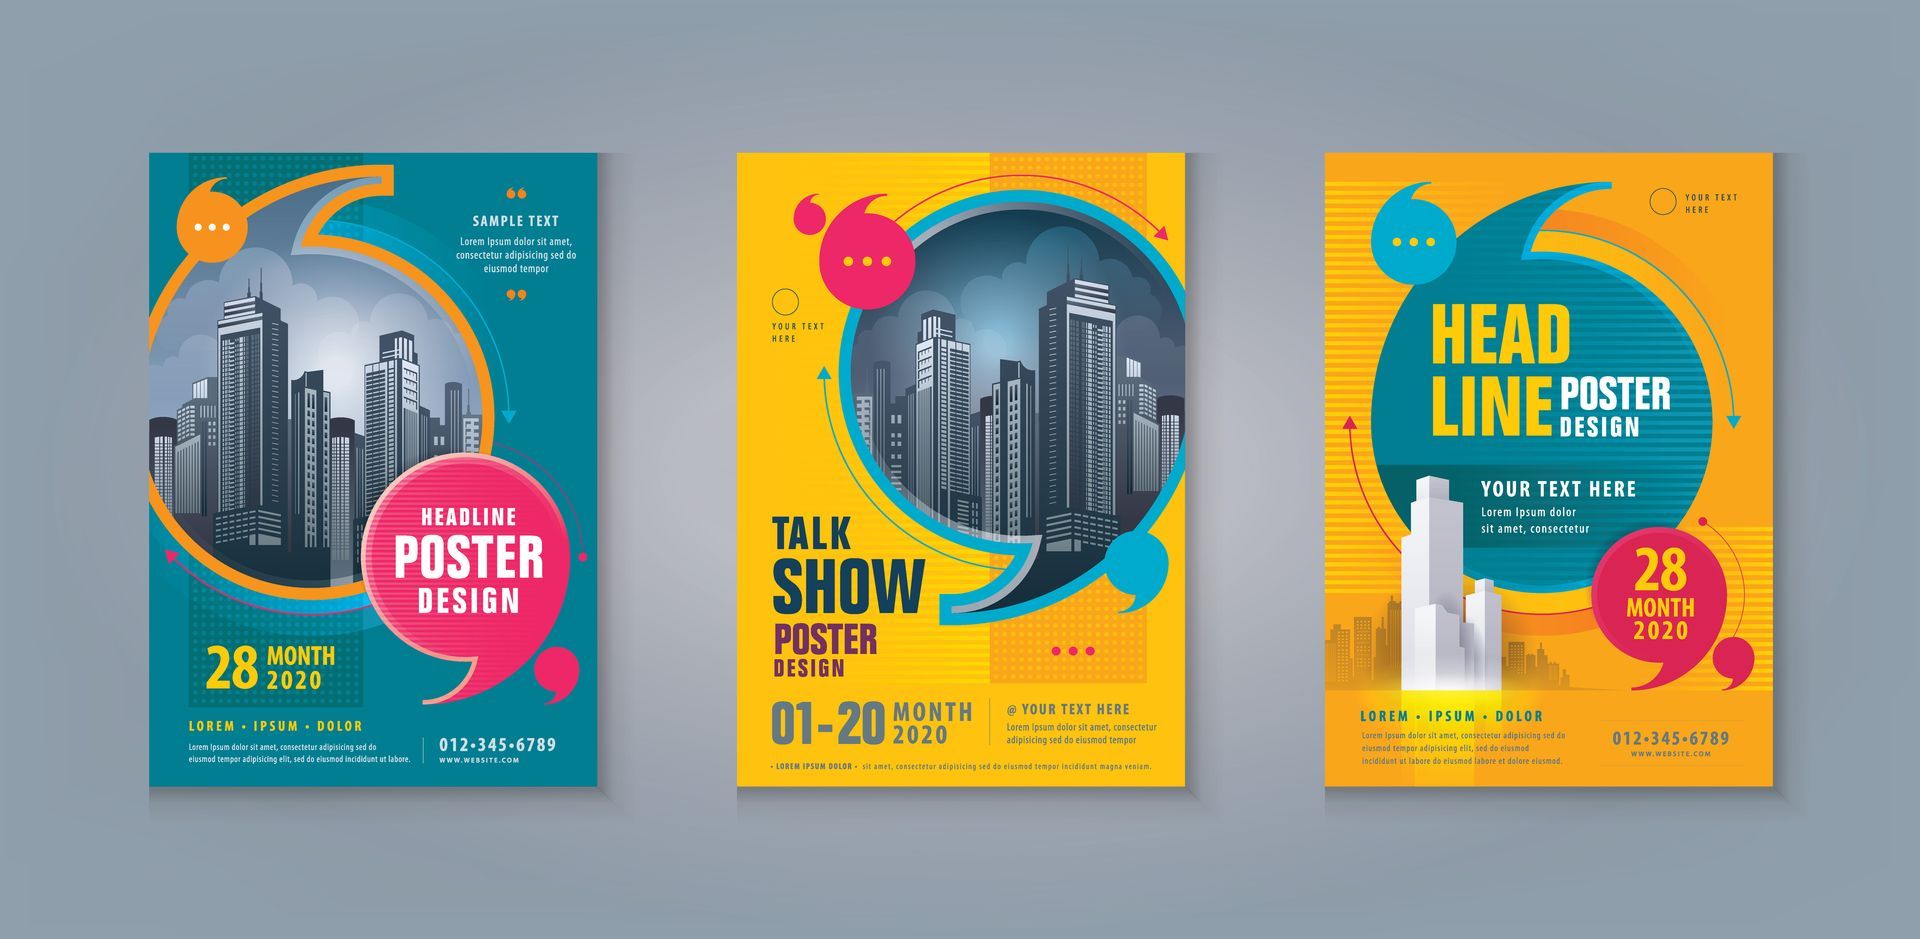 Aliso Viejo Custom Posters For Conferences & Trade Shows